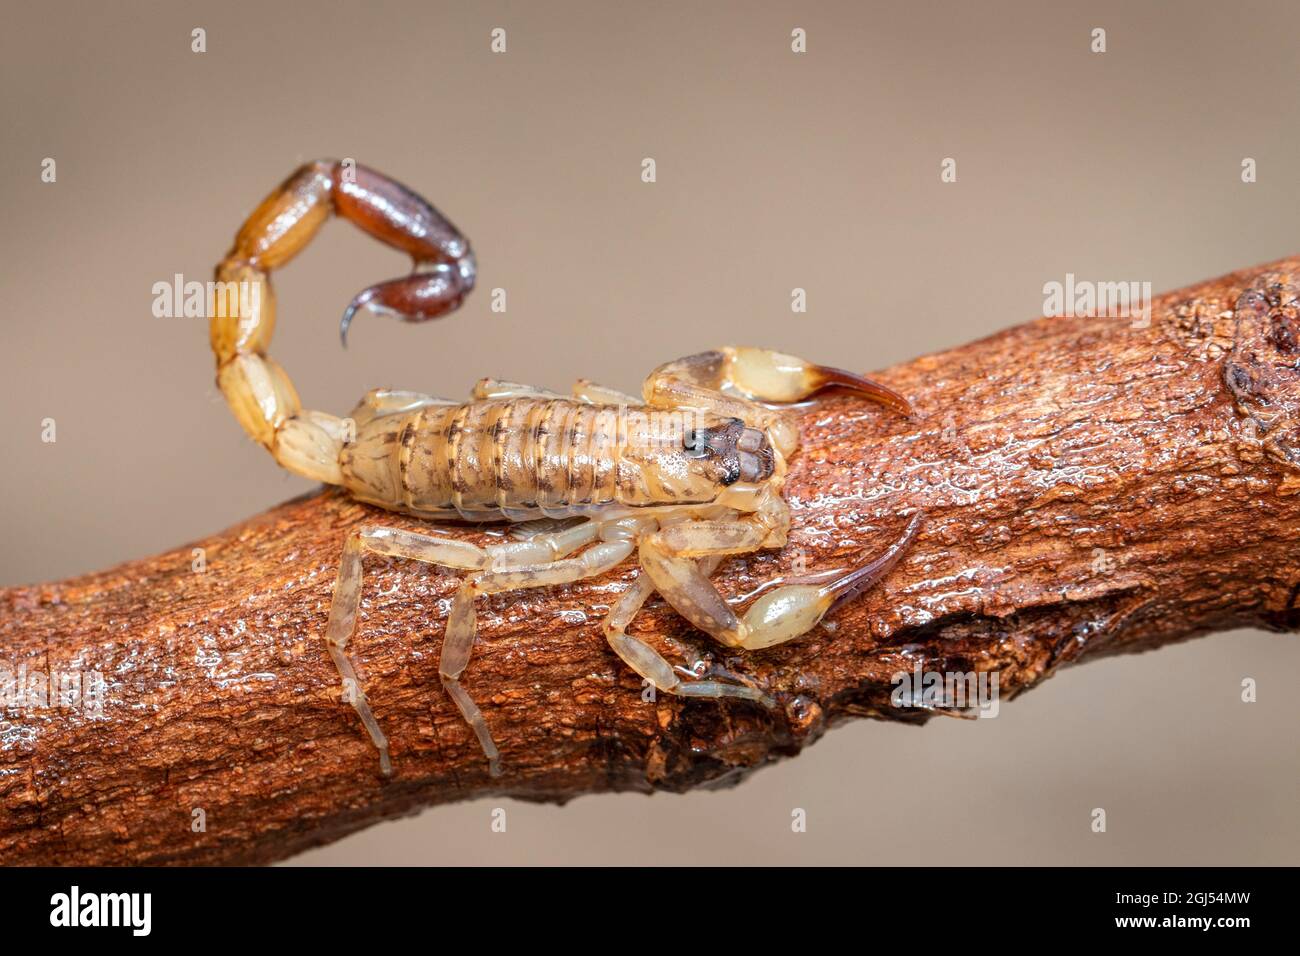 Image of brown scorpion on brown dry tree branch. Insect. Animal. Stock Photo